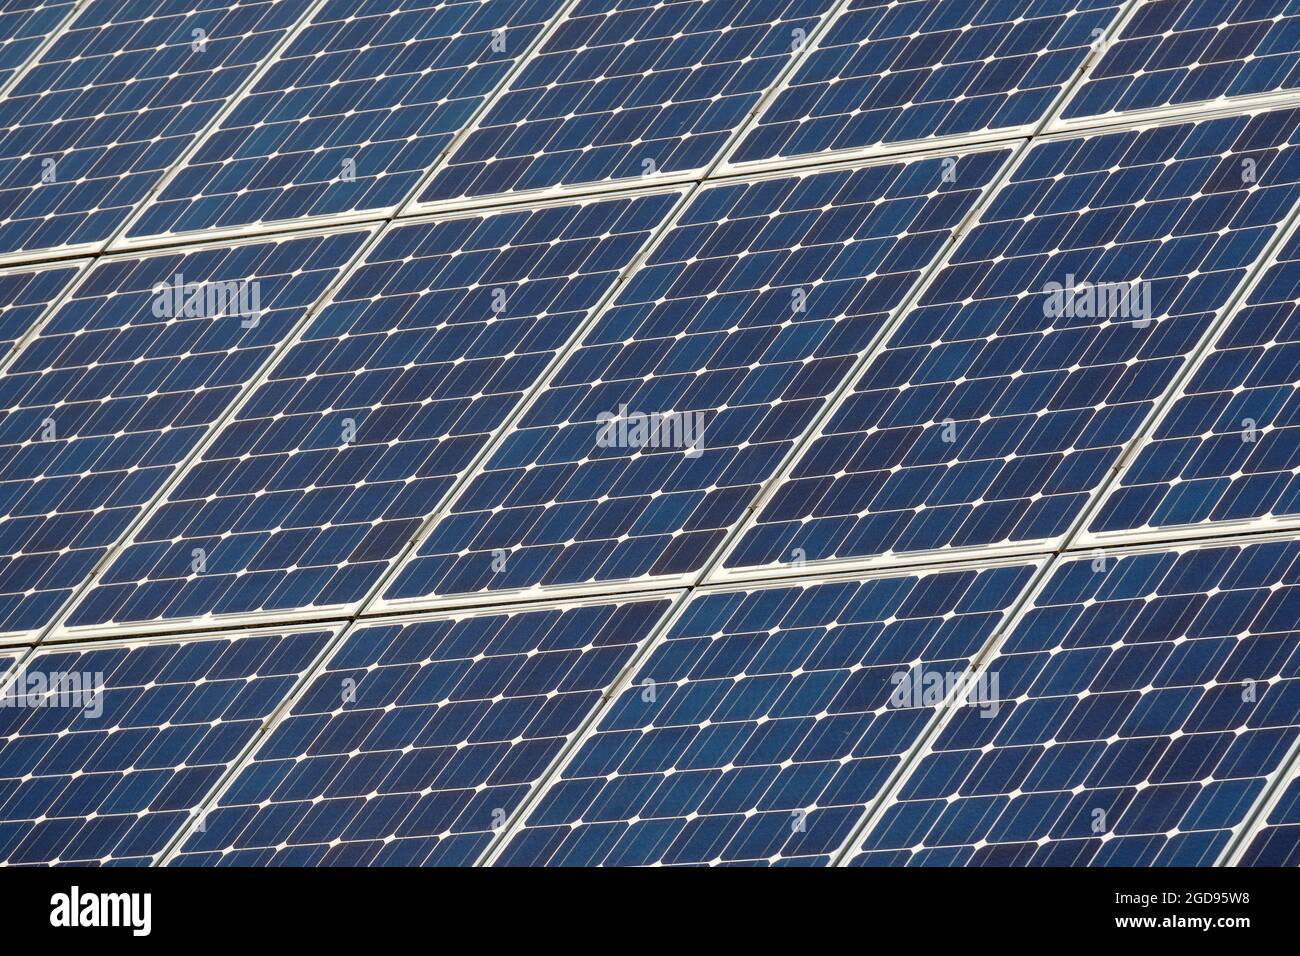 Closeup of solar cells mounted on a roof. Seen in Germany in July Stock Photo